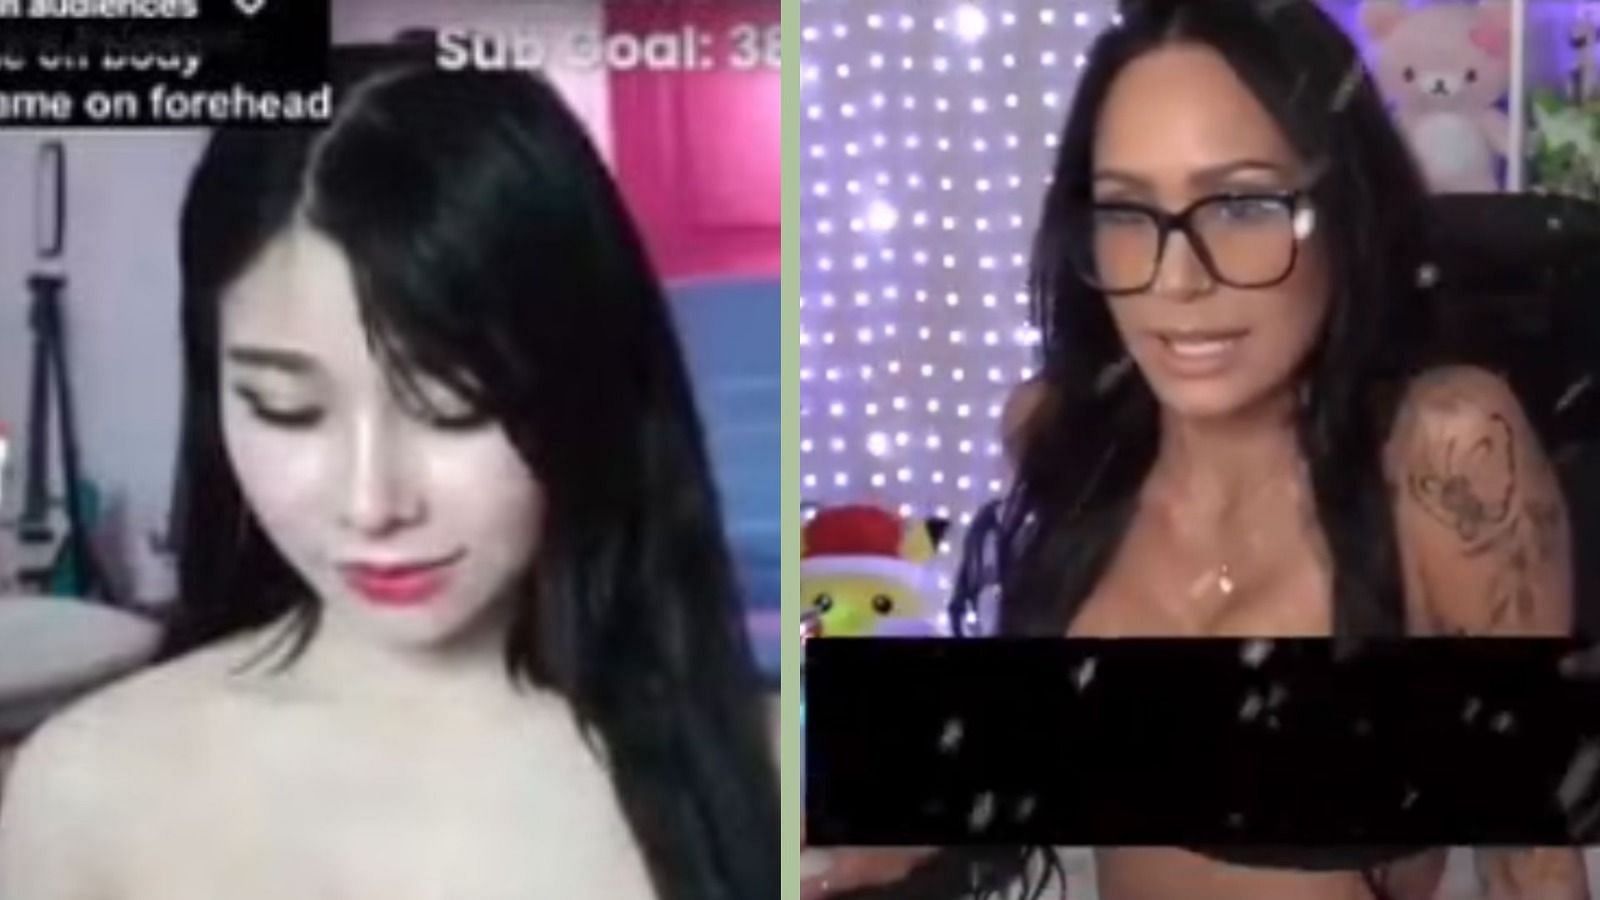 NSFW streamers use black boxes to cover parts of their bodies (Image via Twitch/Asianbunnyx and Firedancer)